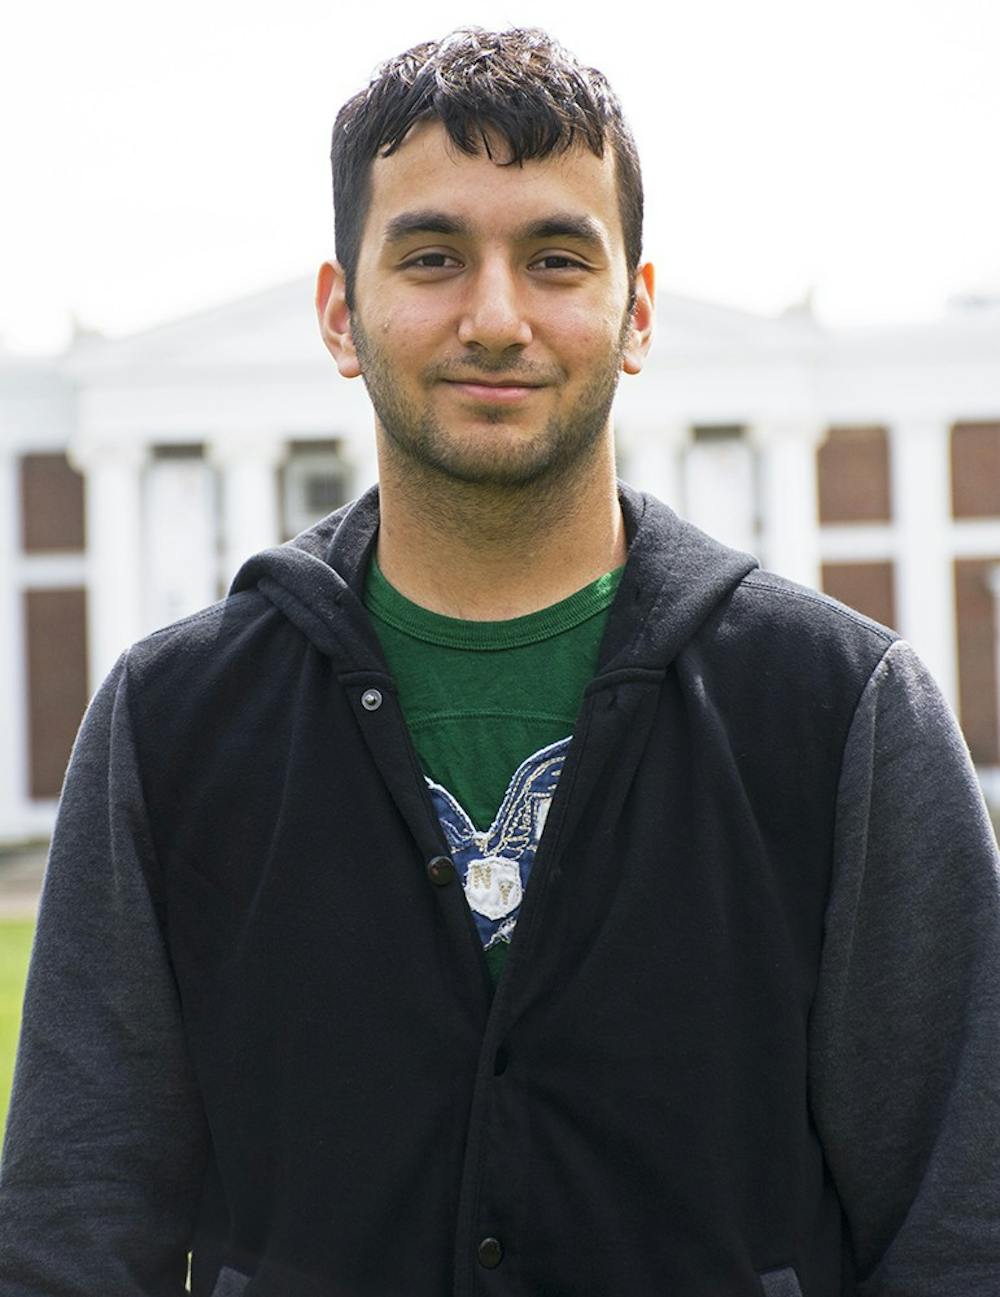 <p>First-year College student&nbsp;discusses dual identity as student and refugee.&nbsp;</p>